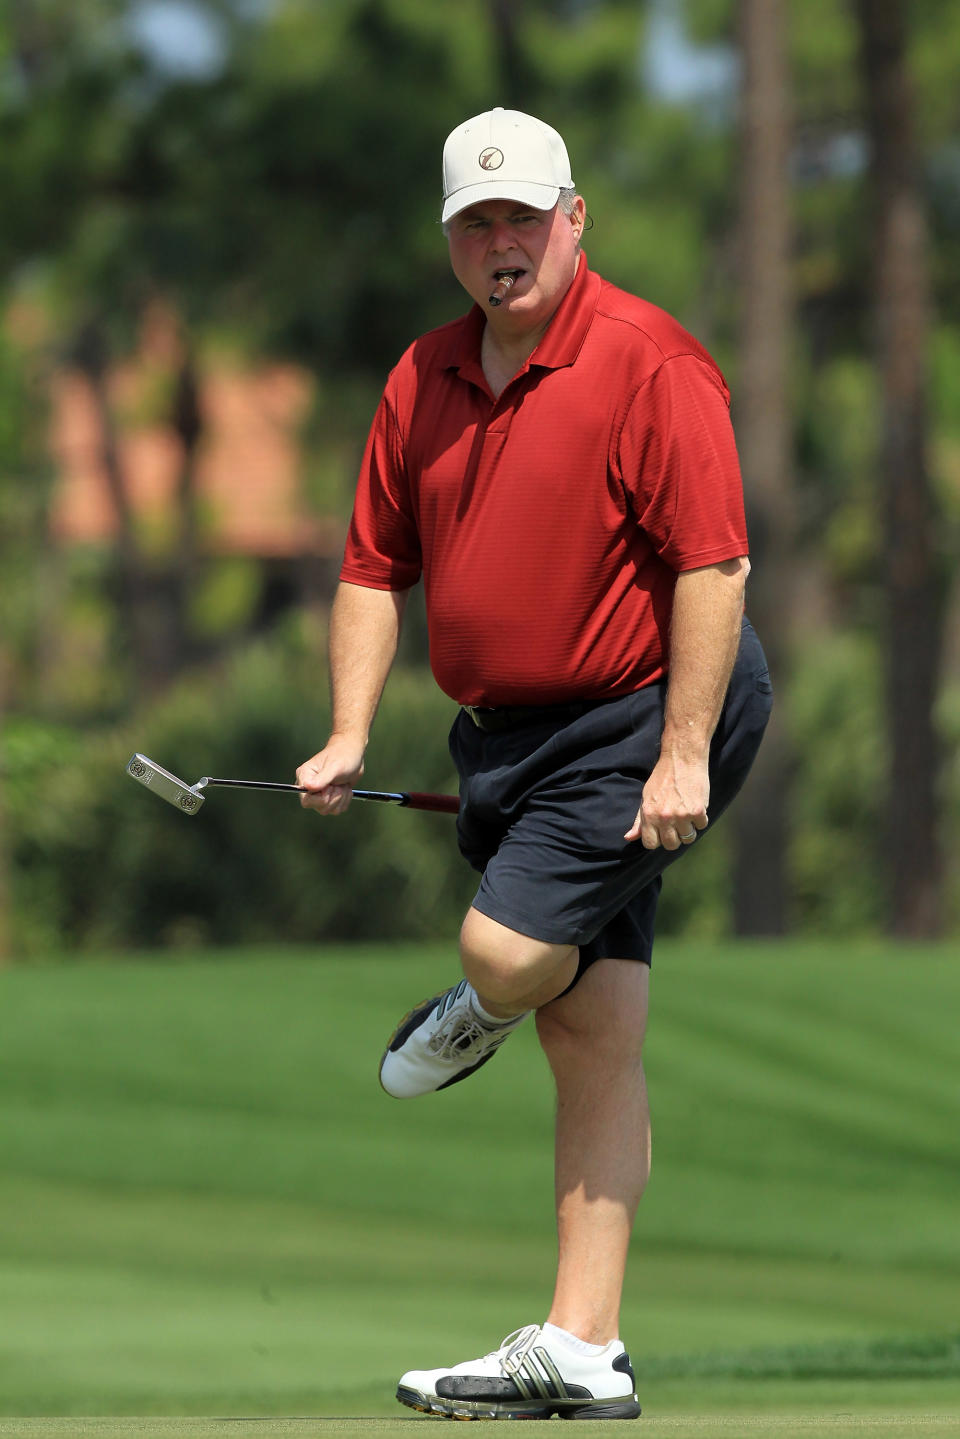 <b>15. Rush Limbaugh, $69 million</b>: WEST PALM BEACH, FL - MARCH 21: Rush Limbaugh the Radio Presenter during the Els for Autism Pro-am at The PGA National Golf Club on March 21, 2011 in West Palm Beach, Florida. (Photo by David Cannon/Getty Images)